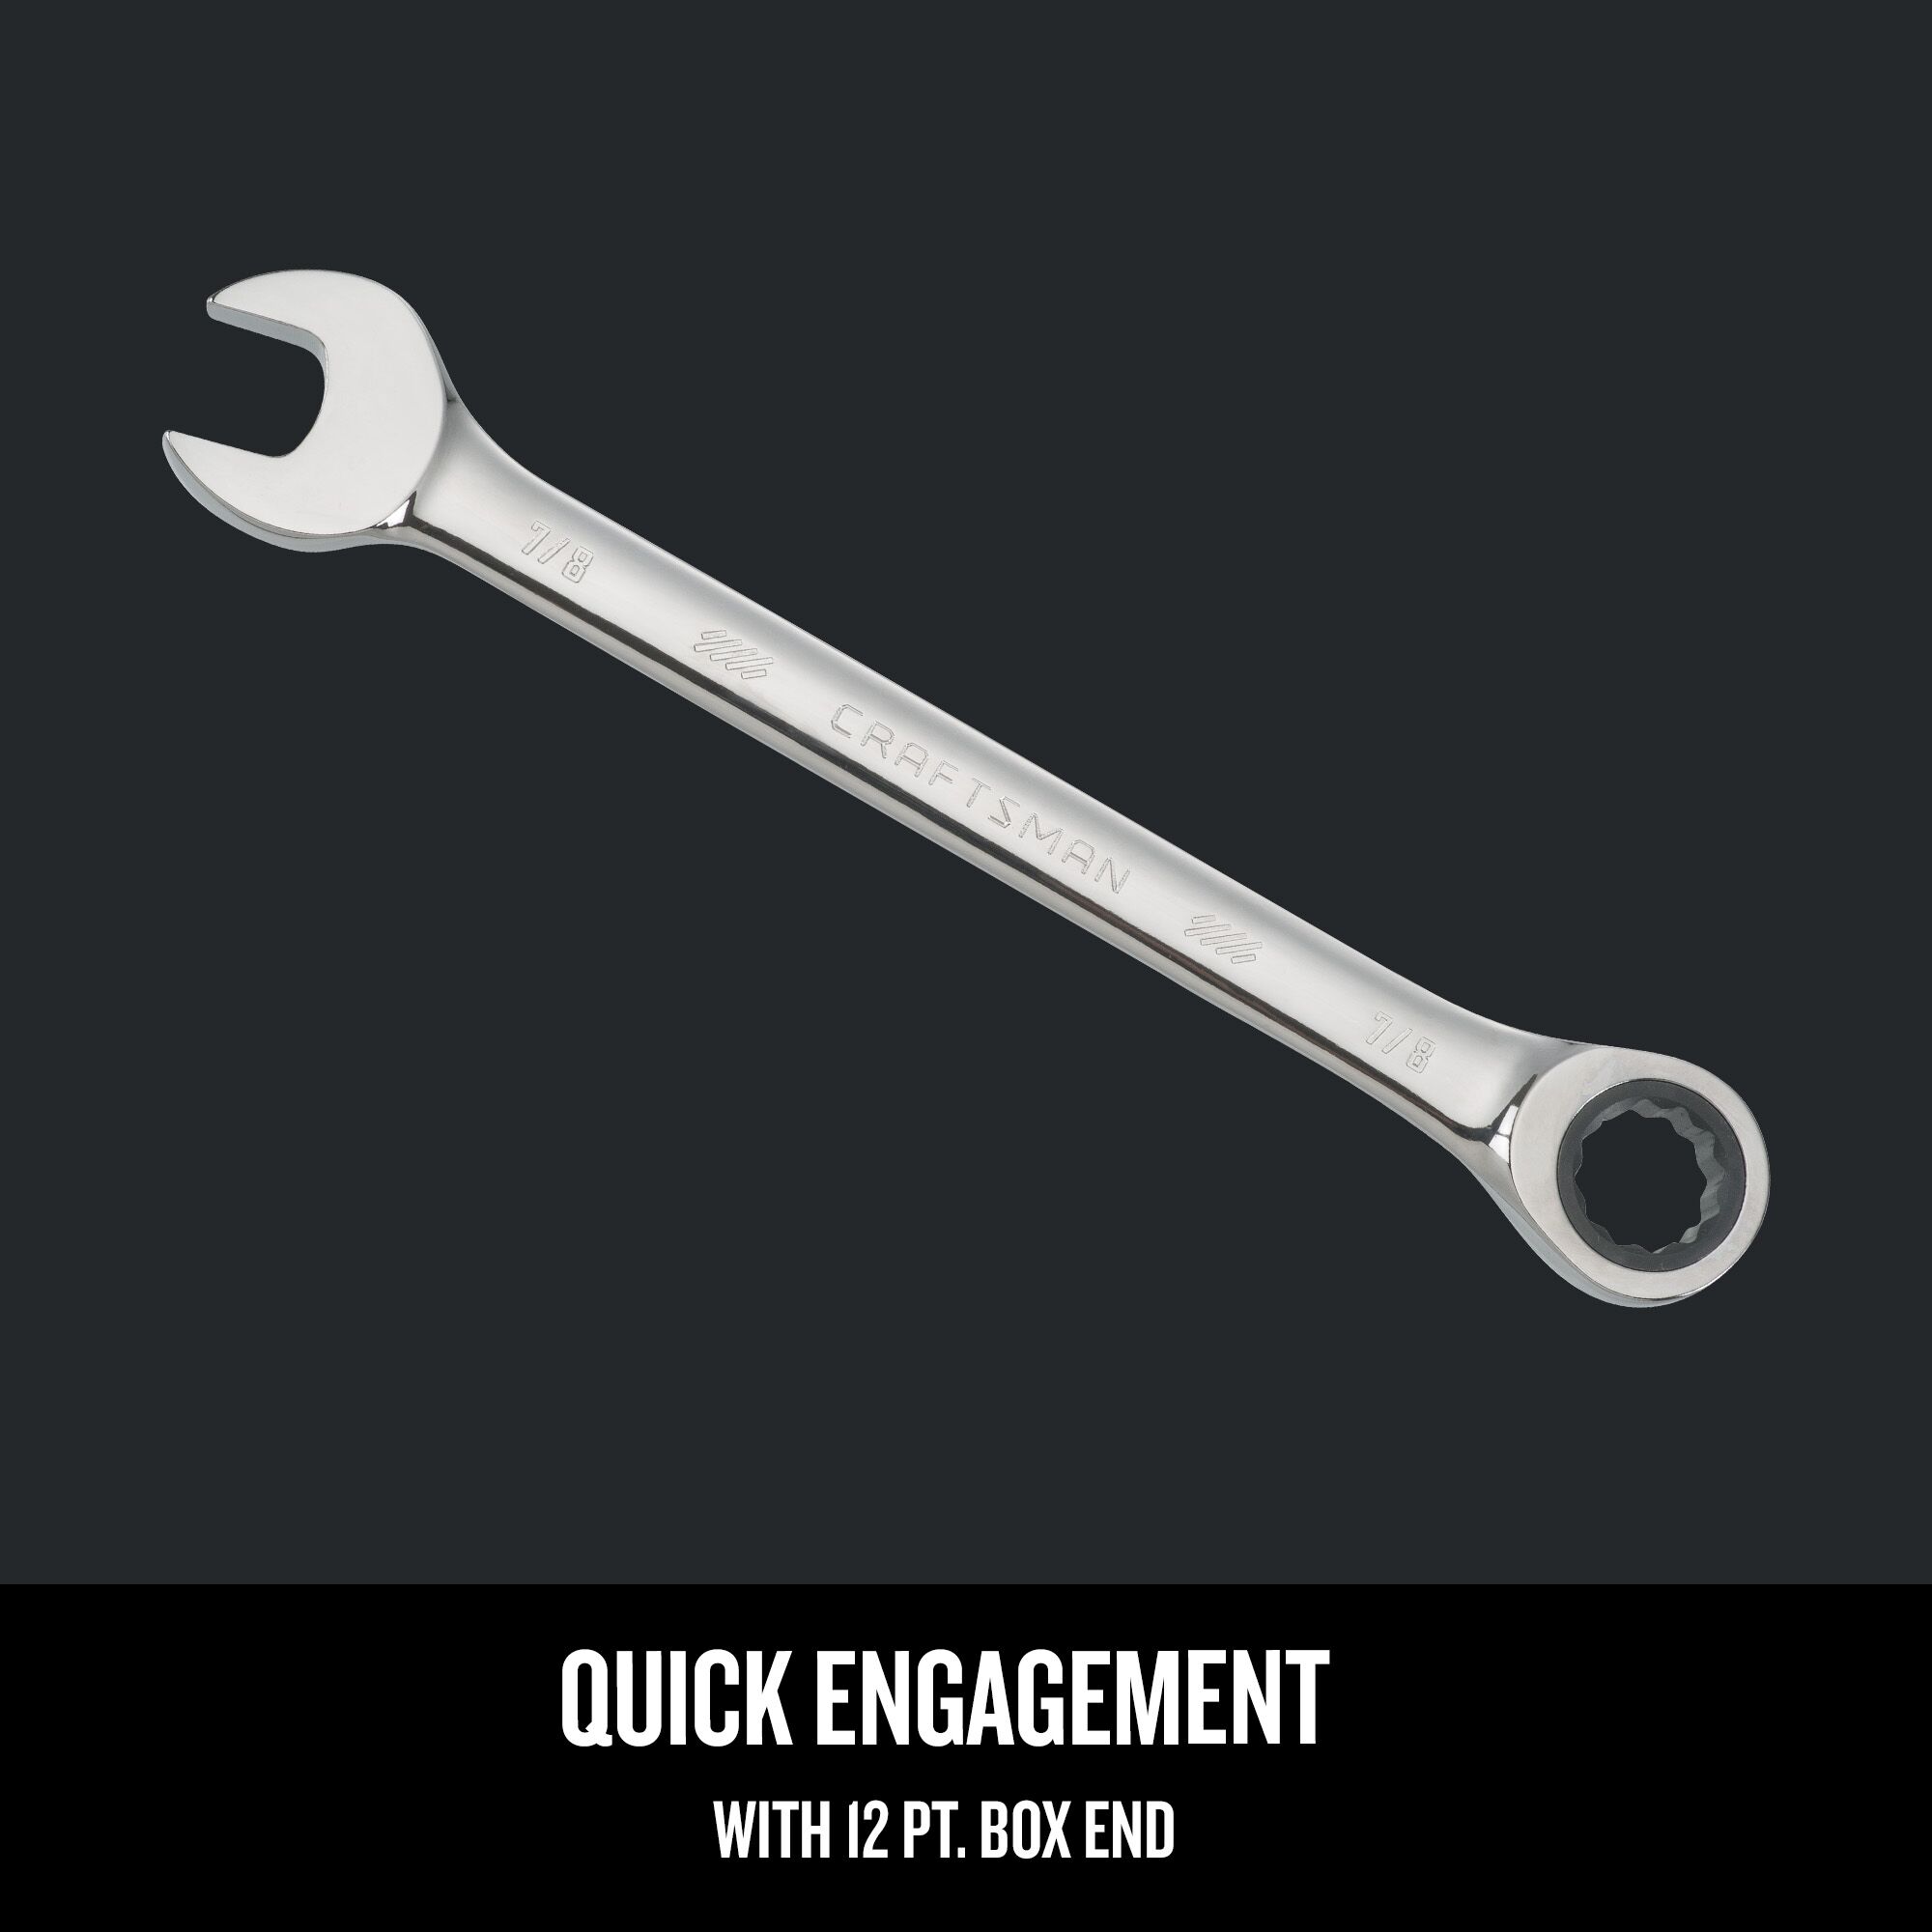 Graphic of CRAFTSMAN Wrenches: Ratcheting highlighting product features